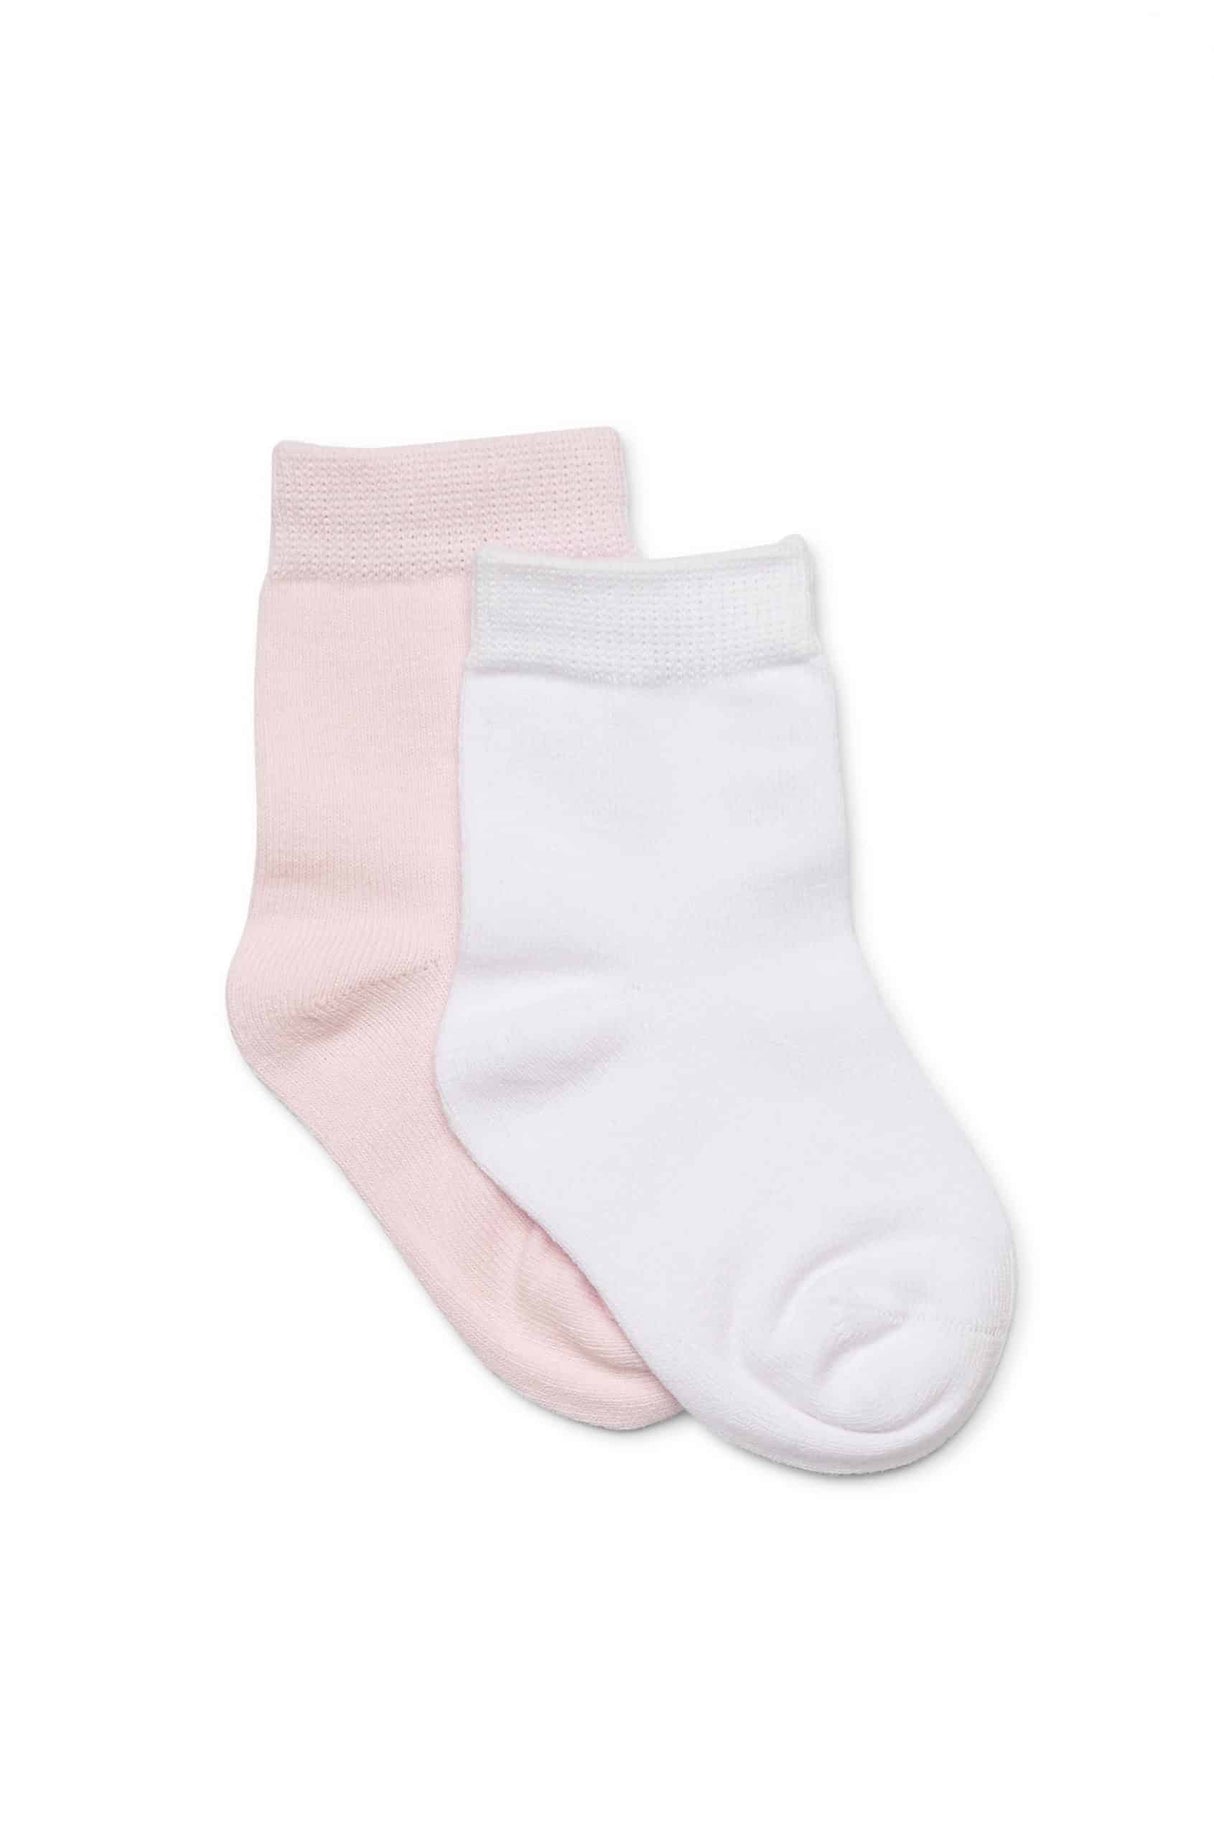 Pink and White Socks 2 Pack